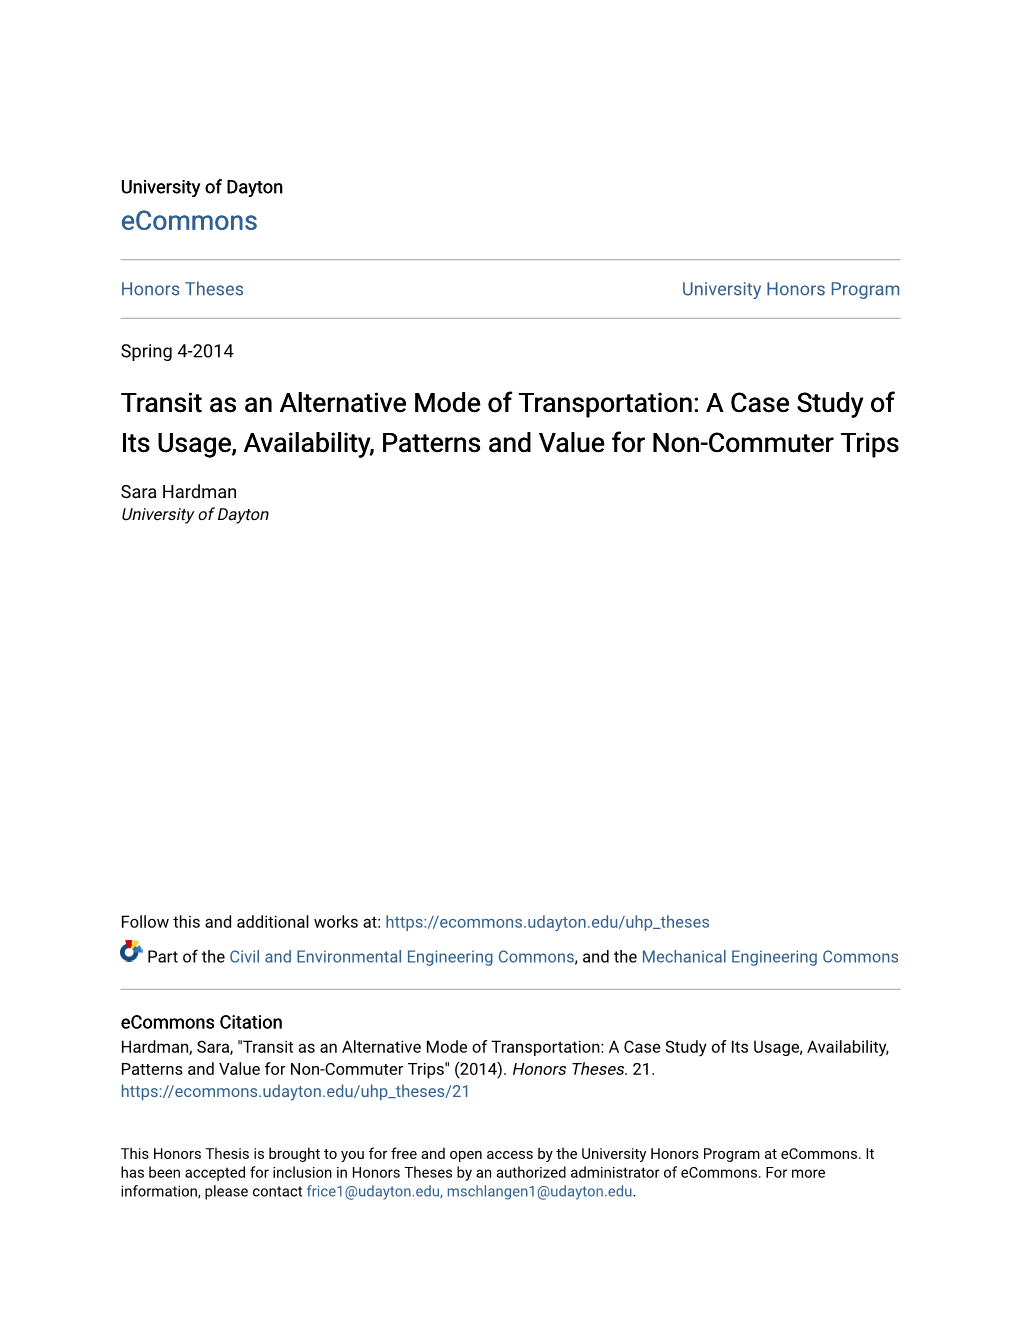 Transit As an Alternative Mode of Transportation: a Case Study of Its Usage, Availability, Patterns and Value for Non-Commuter Trips